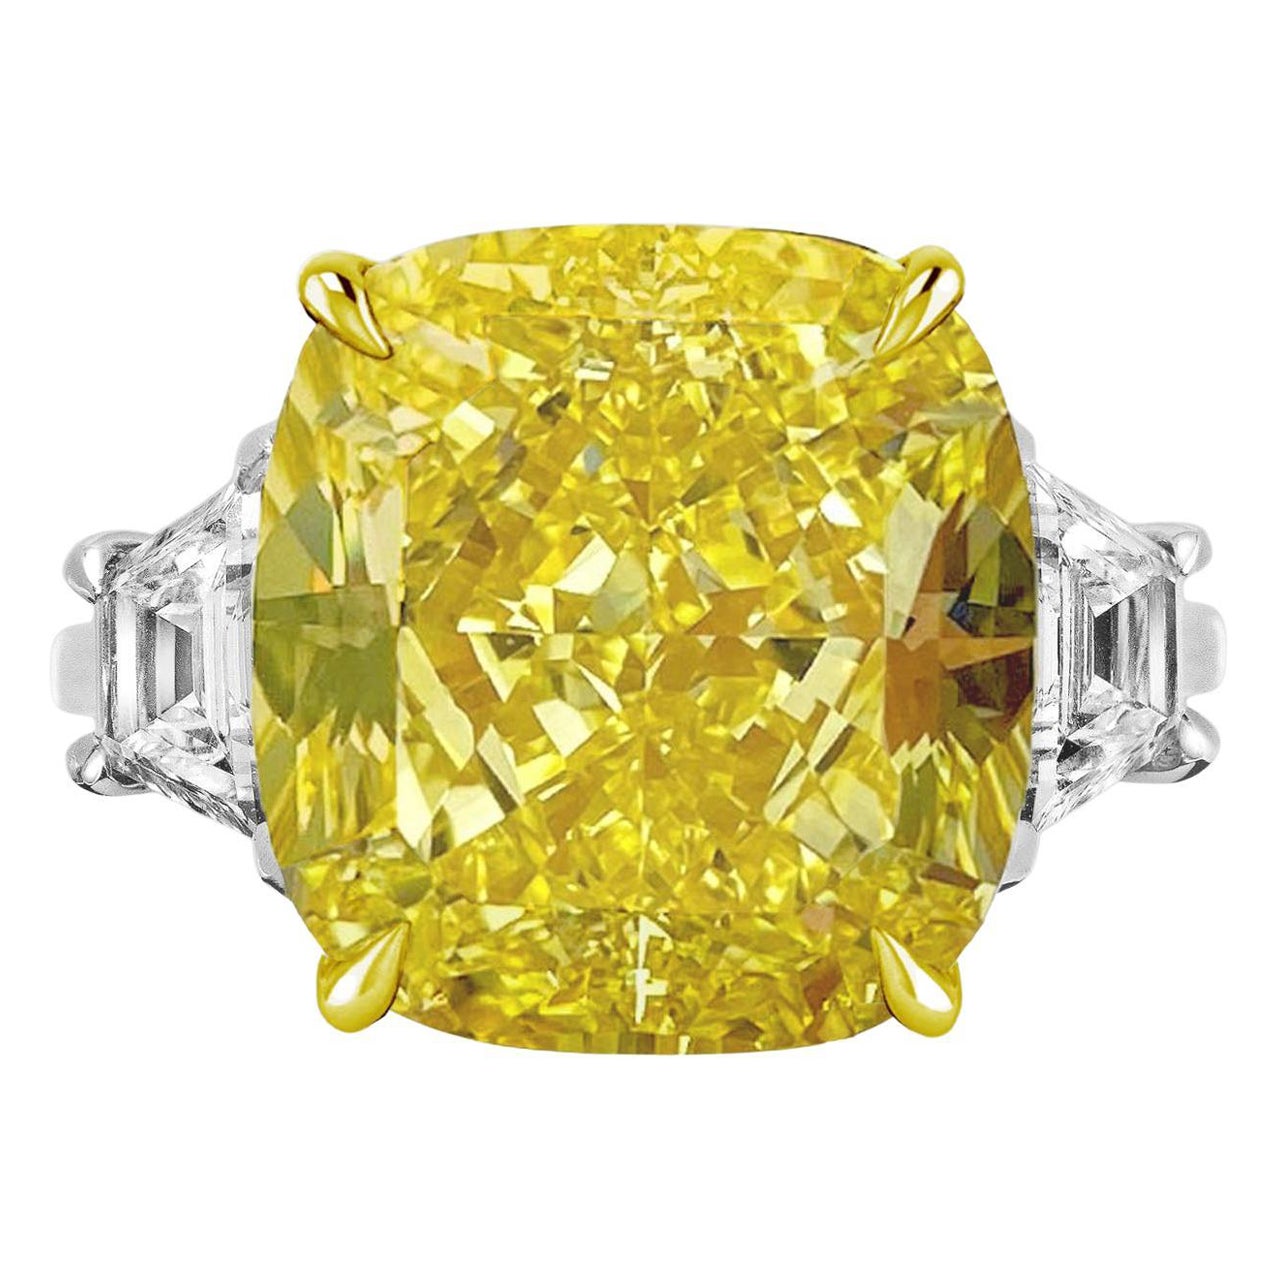 Made in Italy GIA Certified 6 Carat Fancy Yellow Diamond Ring VVS2 Clarity